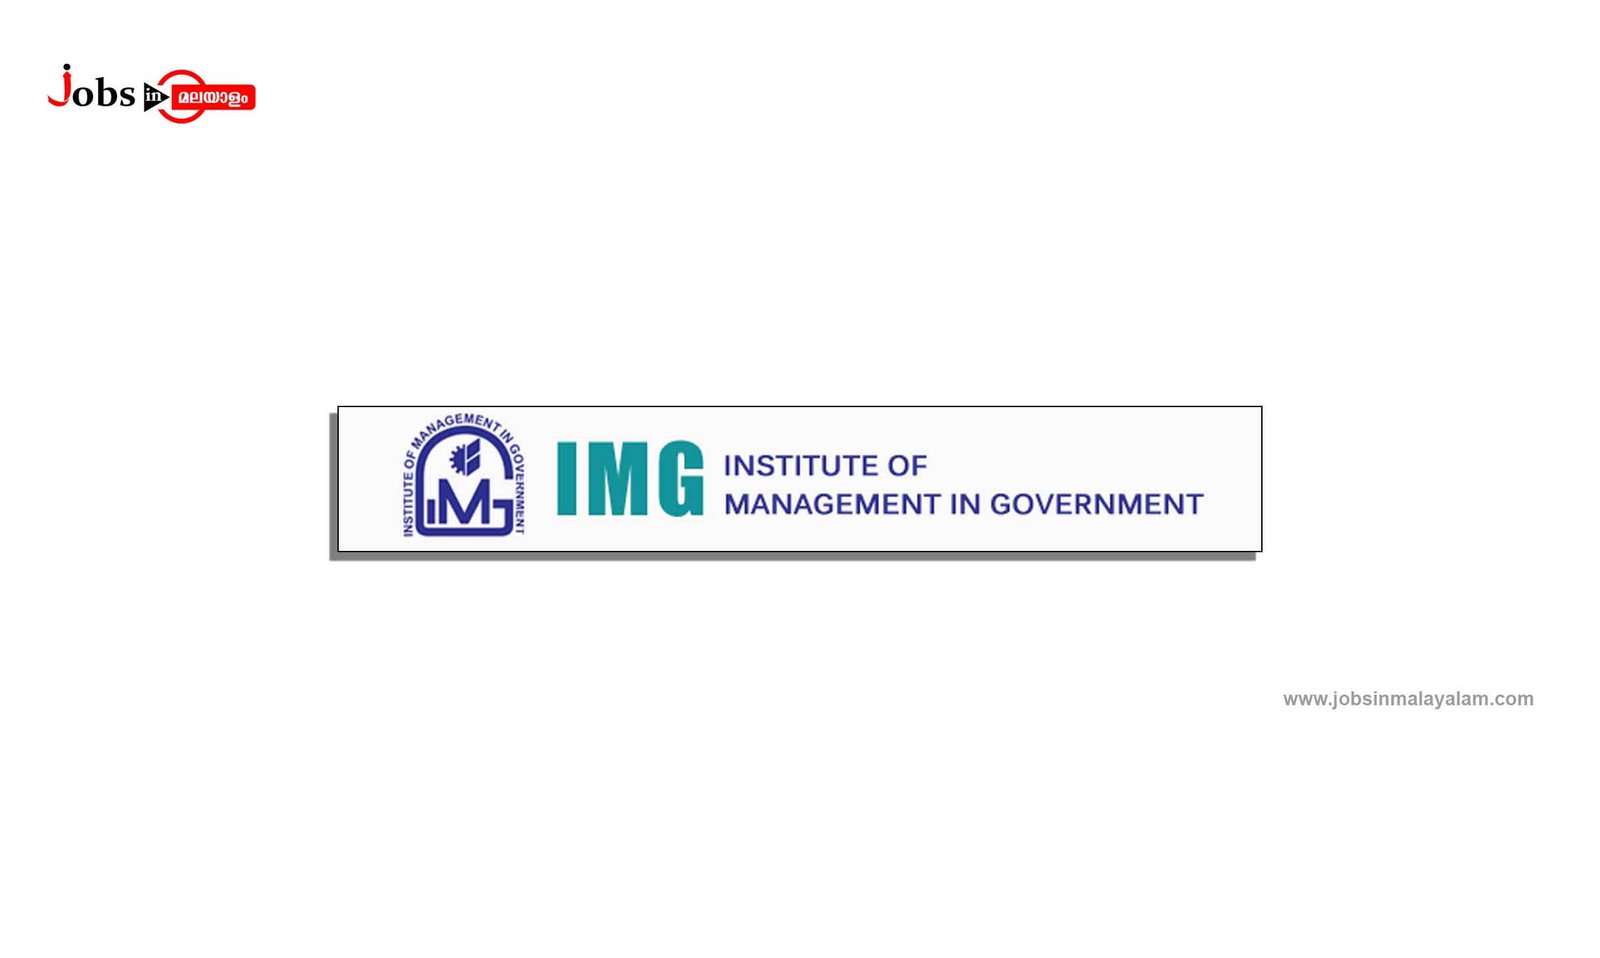 Institute of Management in Government (IMG)